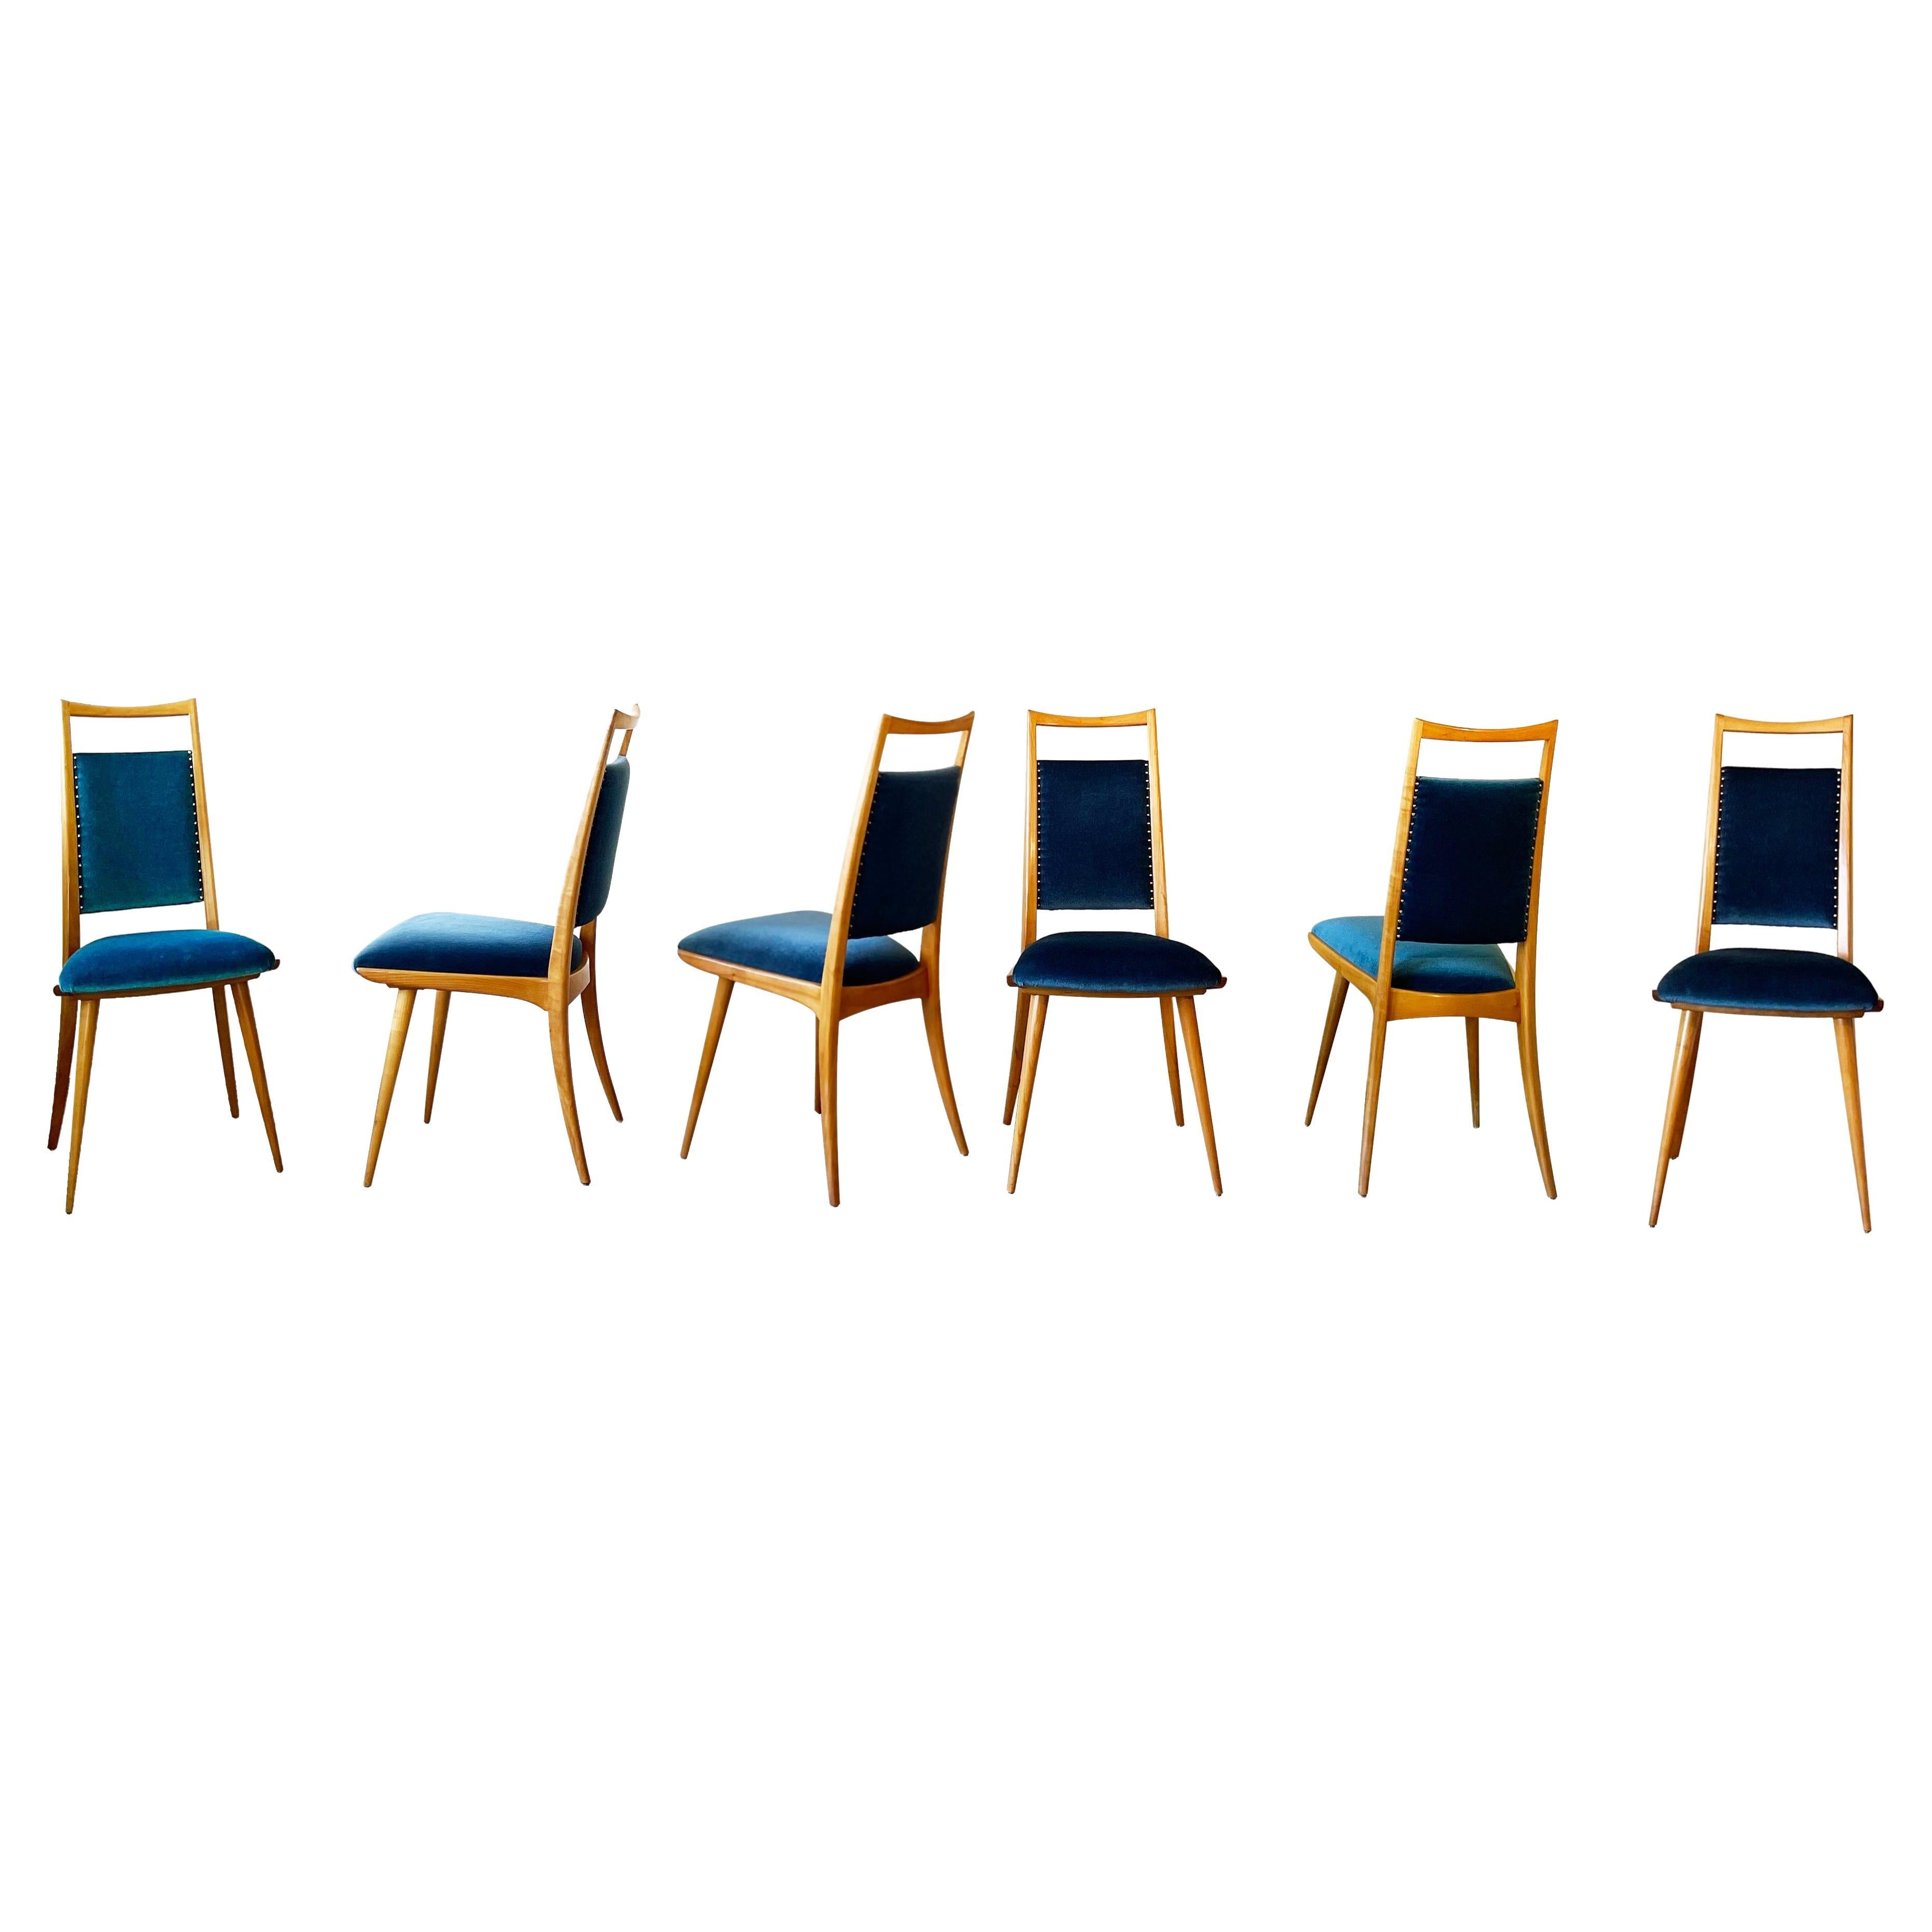 Set of 6 Mid Century Dining Chairs, Turquoise Velvet by Dettinger, Germany For Sale